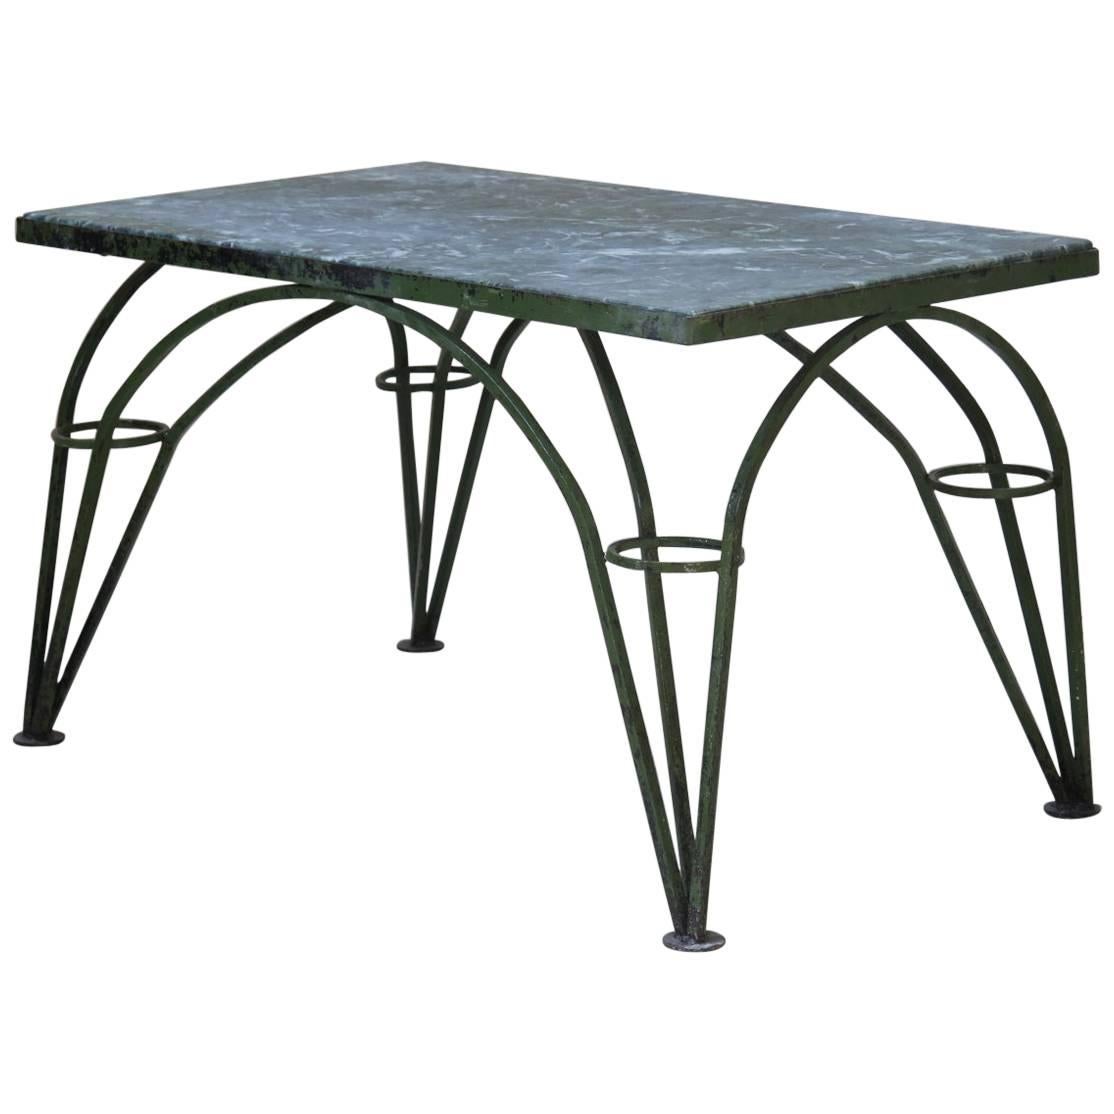 French 1950s Green Painted Iron Coffee Table For Sale